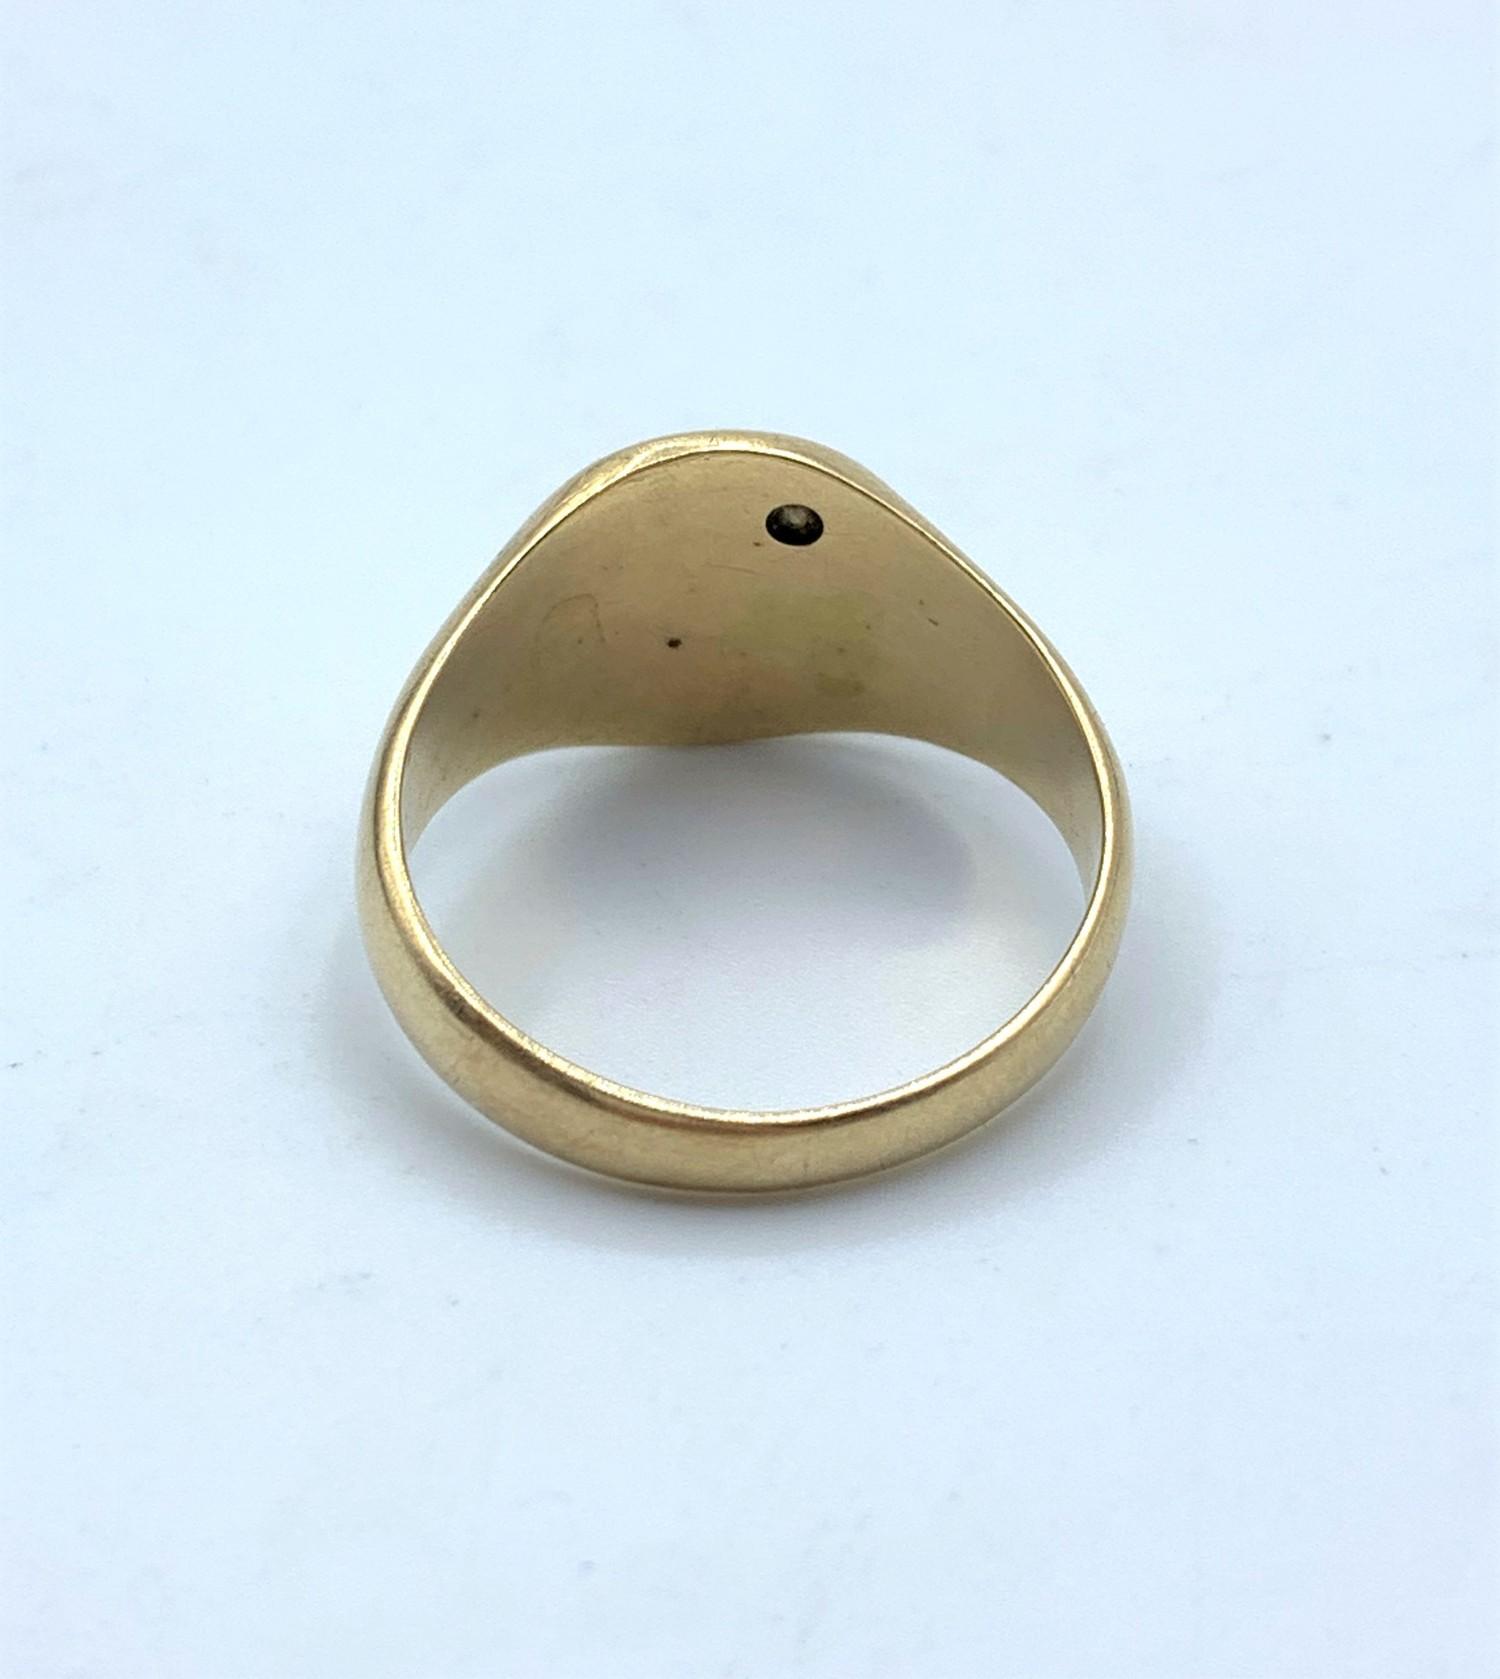 9CT Yellow Gold Signet Ring with Initial K and small Diamond at the corner, size P and weight 4.5g - Image 3 of 3